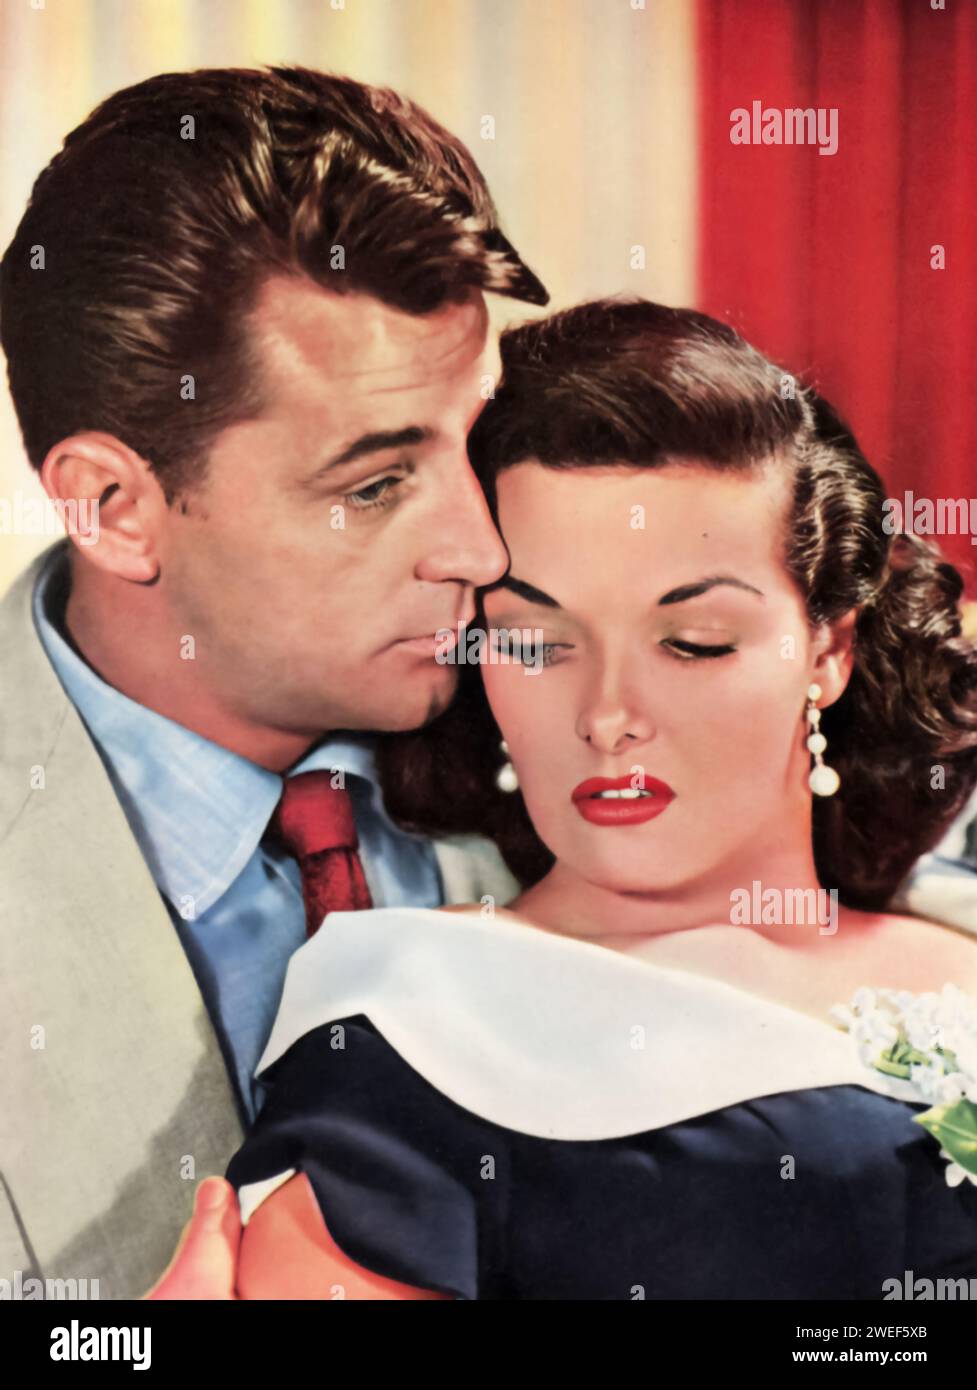 A portrait of Robert Mitchum and Jane Russell, stars of the film 'His Kind of Woman' (1951). In this film noir, Mitchum plays Dan Milner, a down-on-his-luck gambler who finds himself embroiled in a complex plot involving crime and intrigue. Russell portrays Lenore Brent, a singer and love interest of Milner. Set in a glamorous Mexican resort, the film combines suspense, romance, and dark humor. Stock Photo